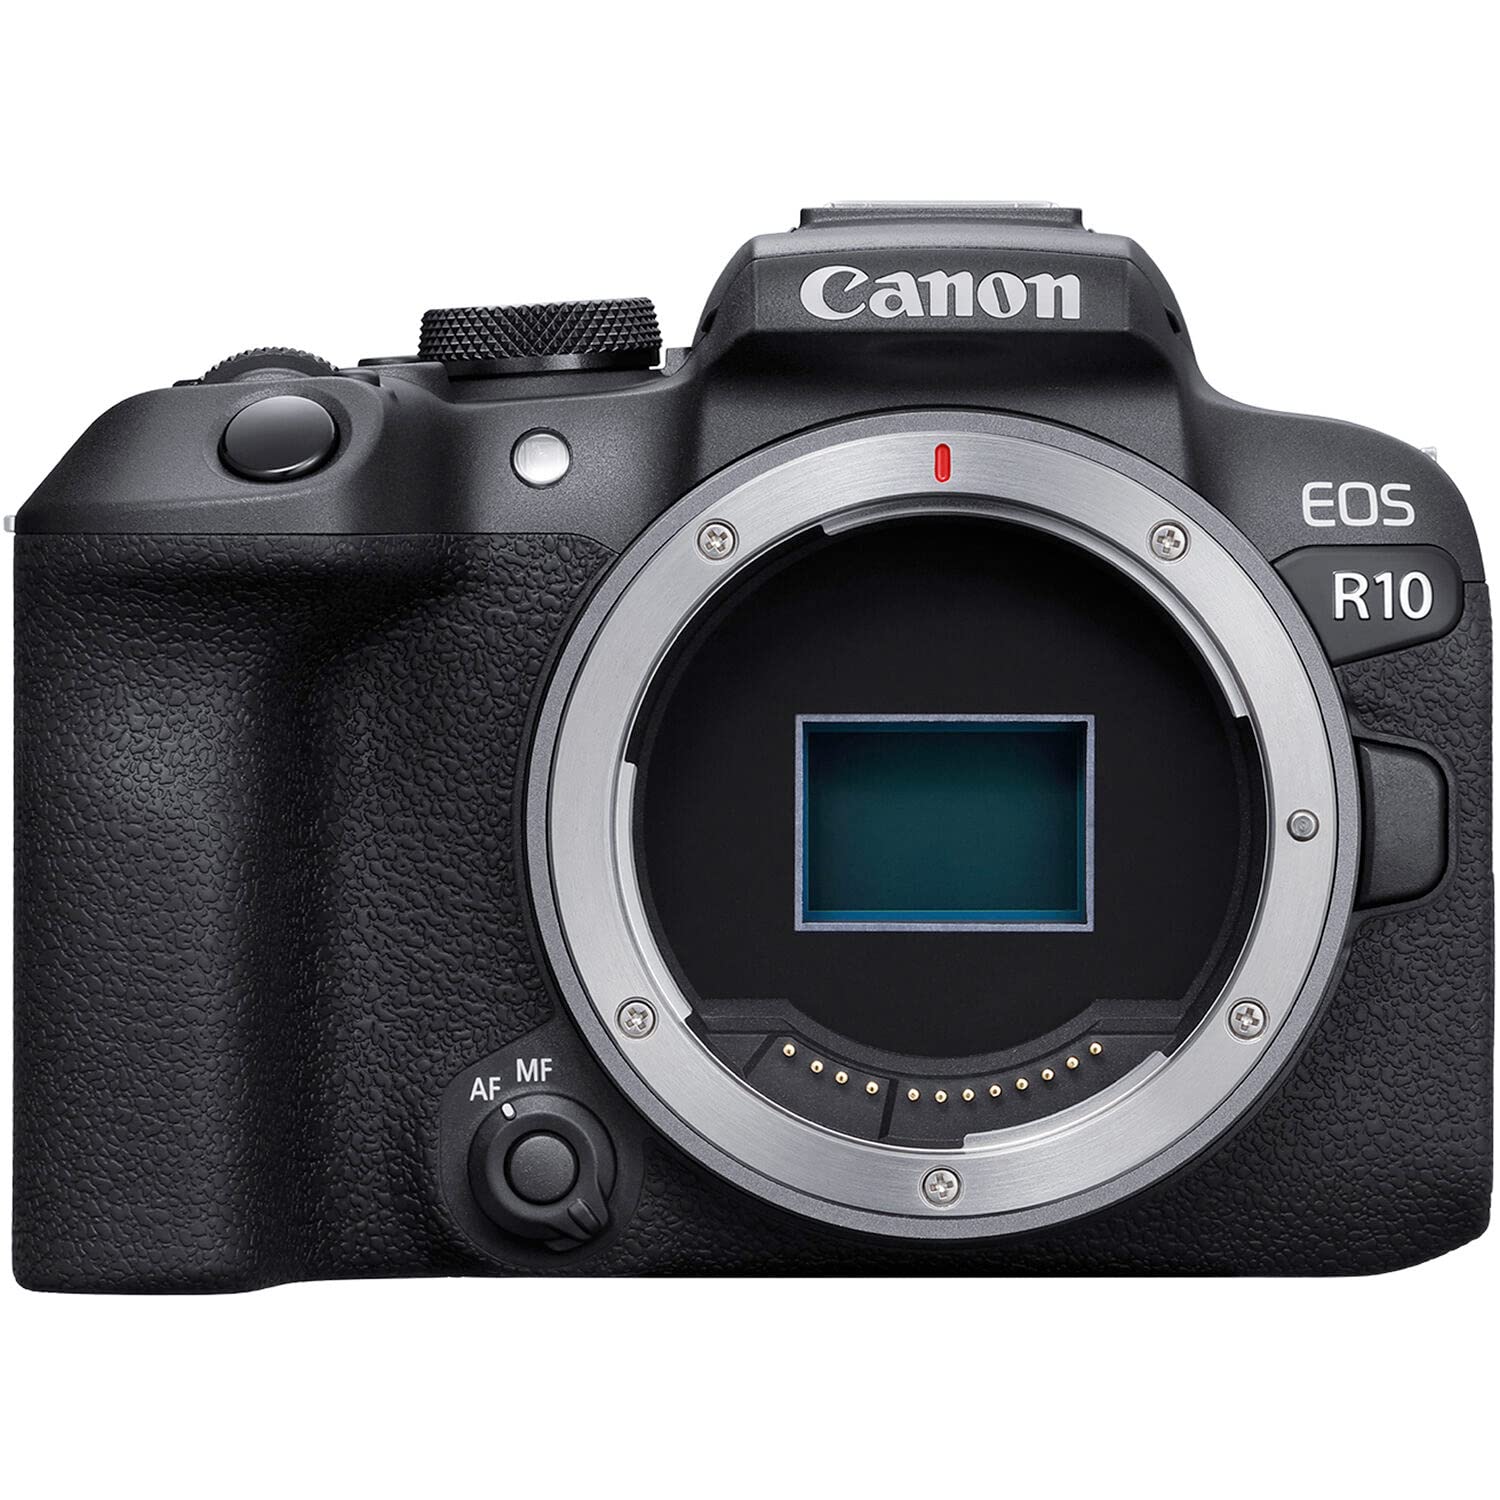 Canon EOS R10 Mirrorless Camera (Body Only) + Canon DM-E100 Directional Microphone + 2pc 64GB Memory Cards + LED Video Light + Case & More (Renewed)